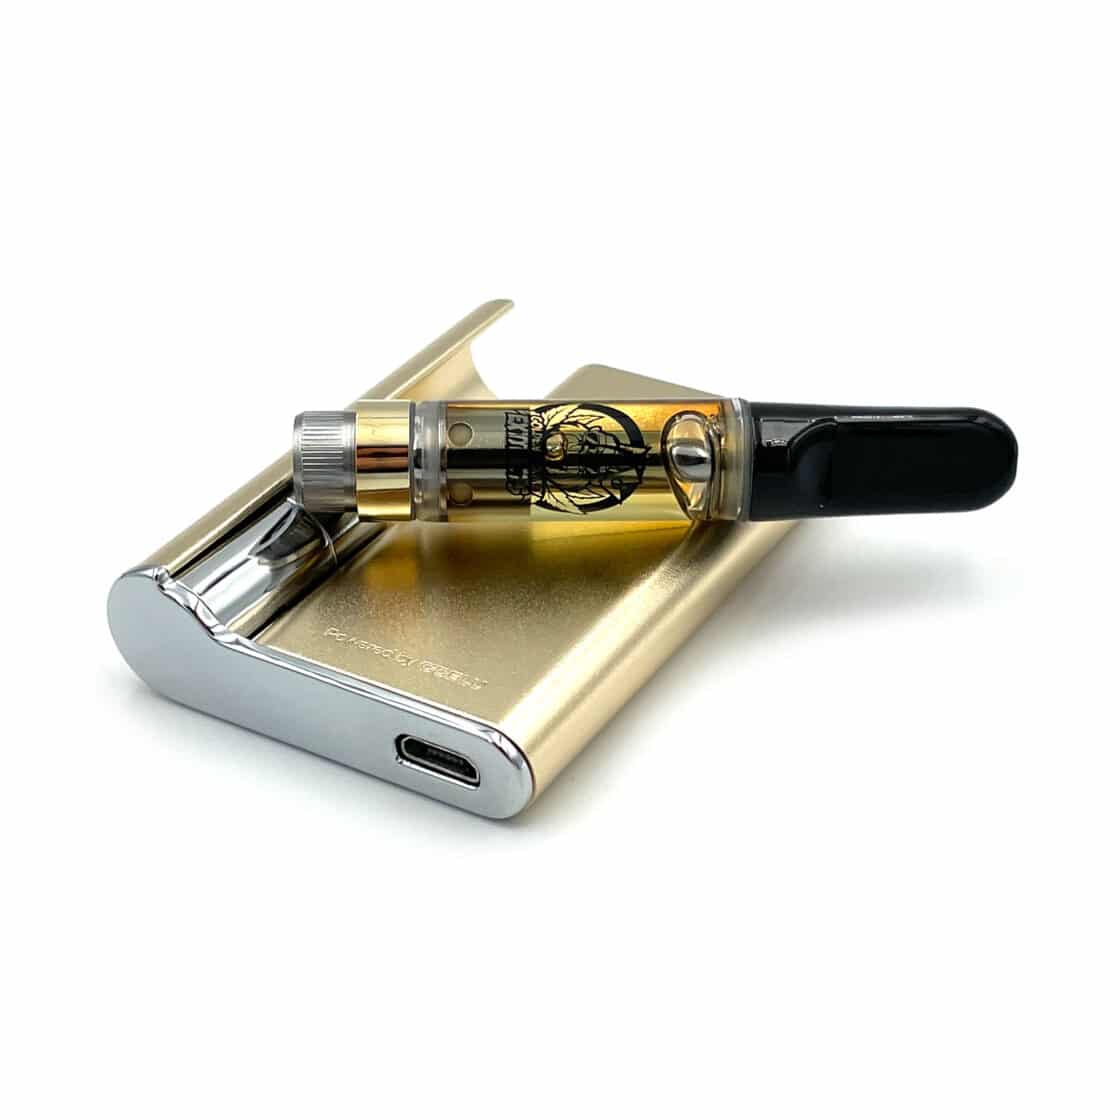 Golden Monkey Extracts – High-performance 510 Thread Gold Plated Palm Battery